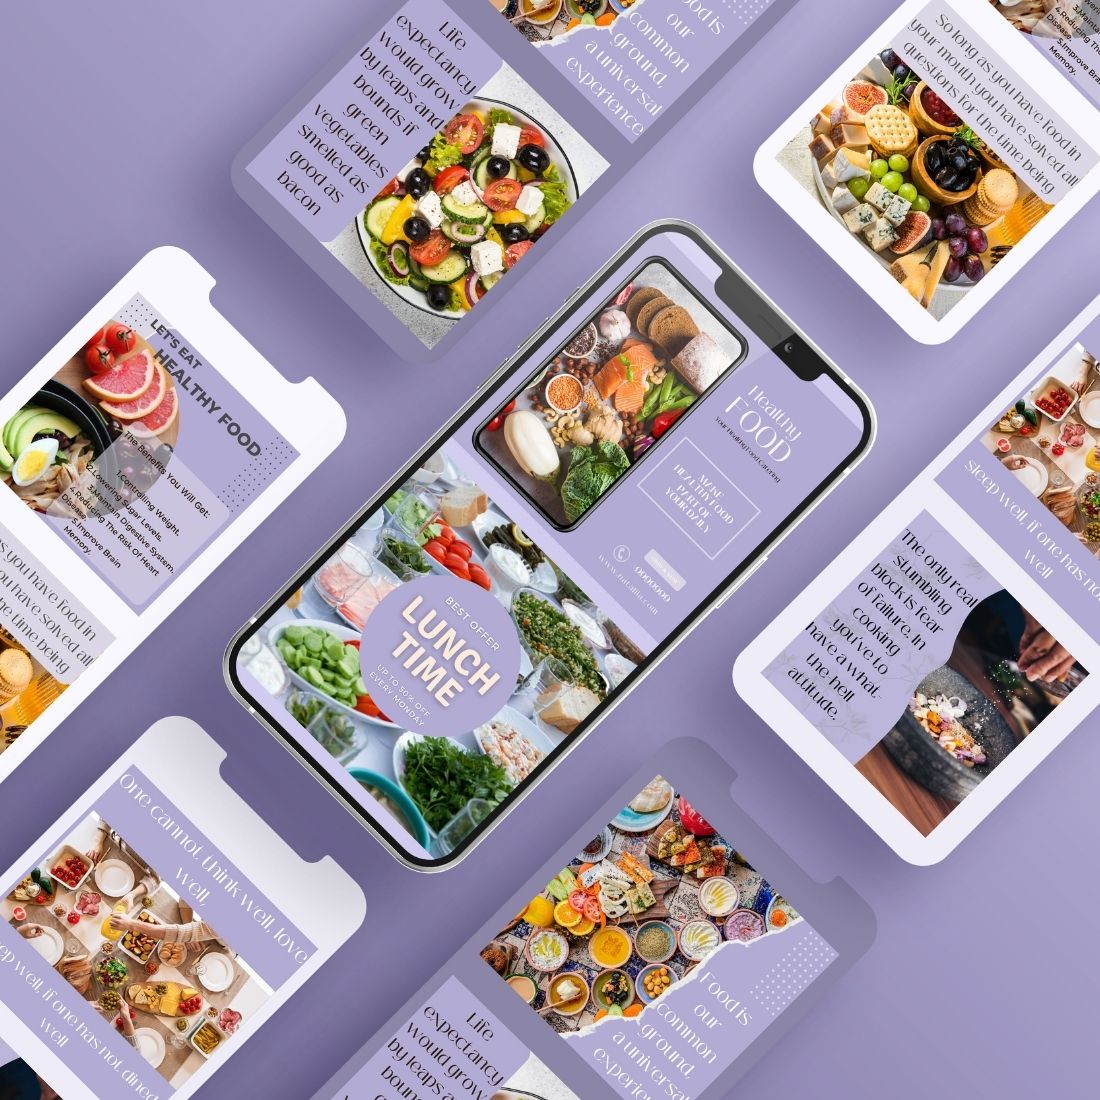 100 Social Media templates about Nutrition, Food and Health.